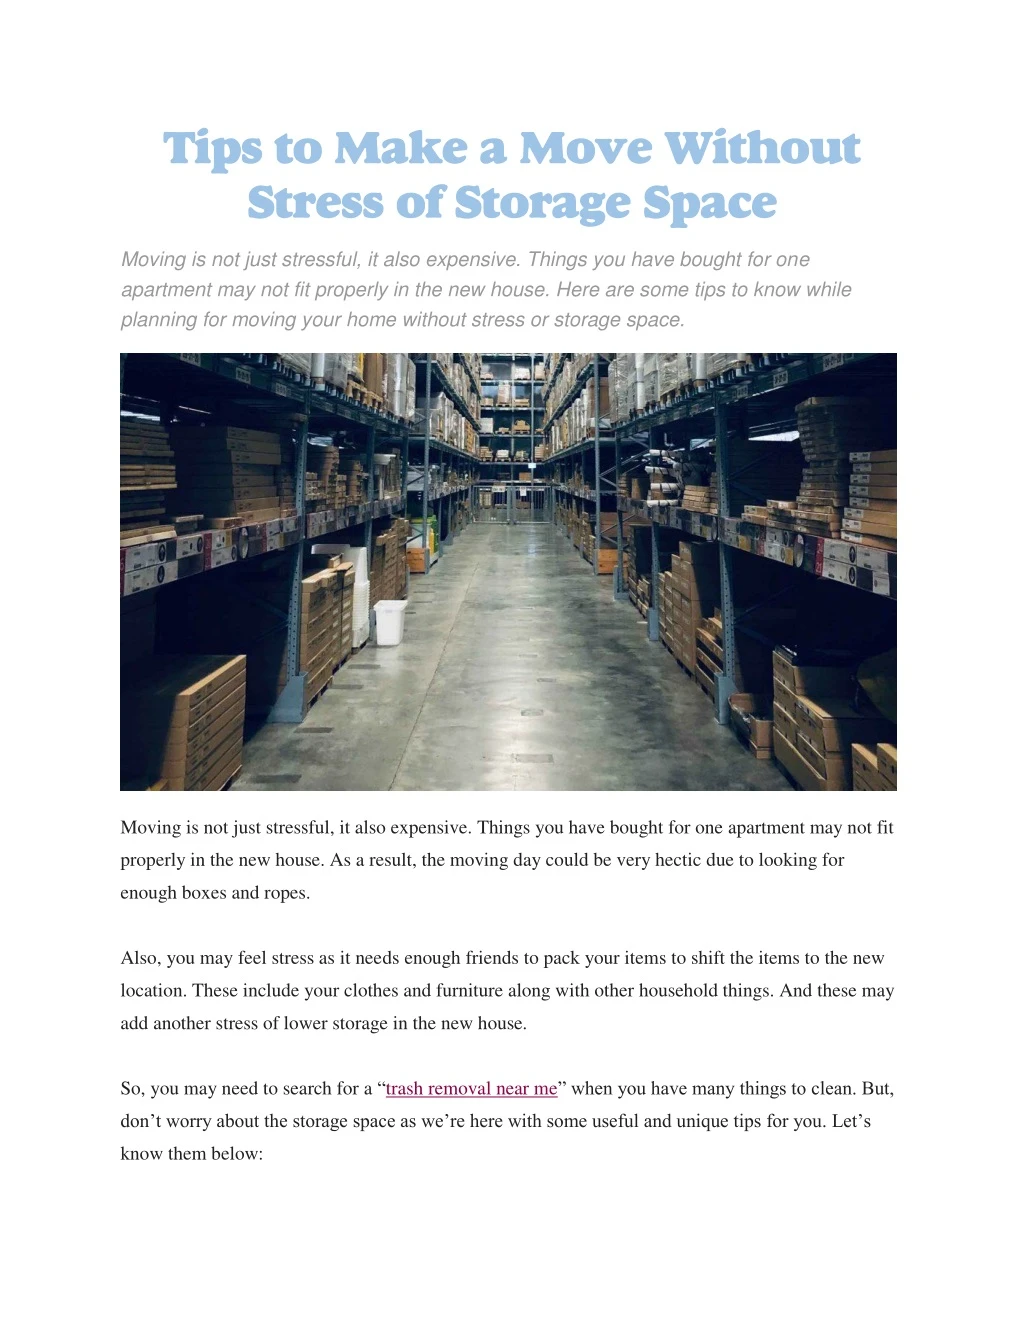 tips to make a move without stress of storage